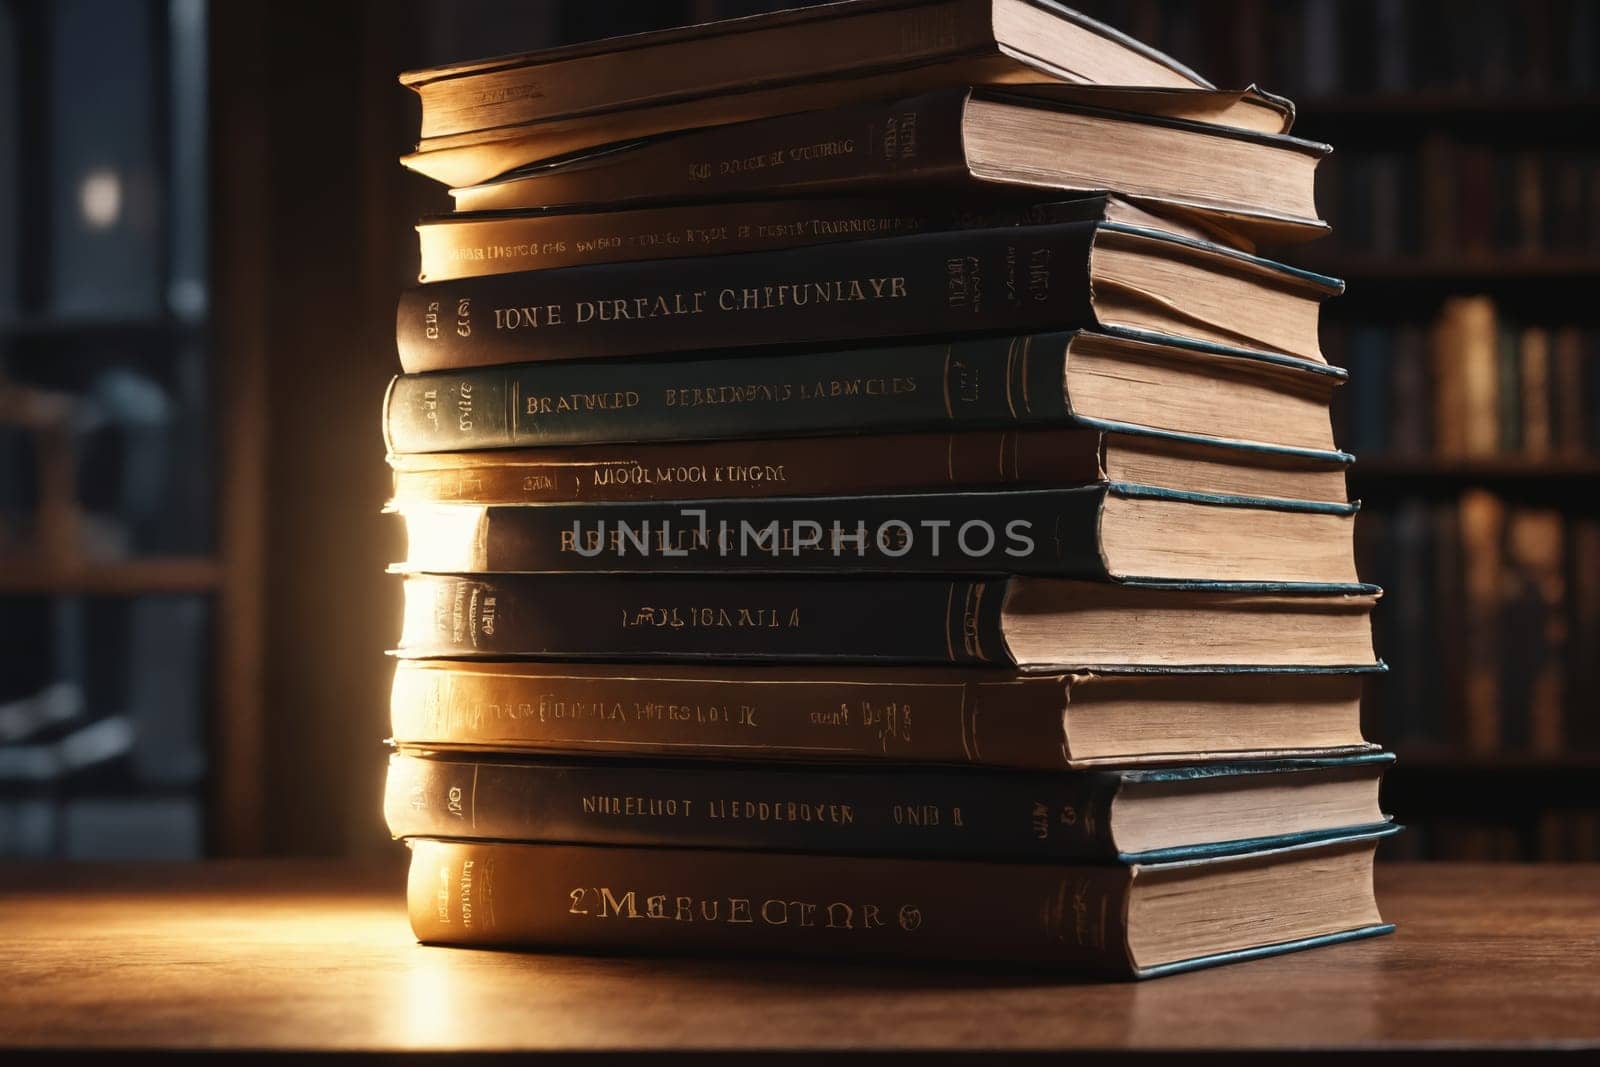 A warm glow envelops a stack of hardcover books, their blue and brown hues inviting a closer look in a cozy setting.